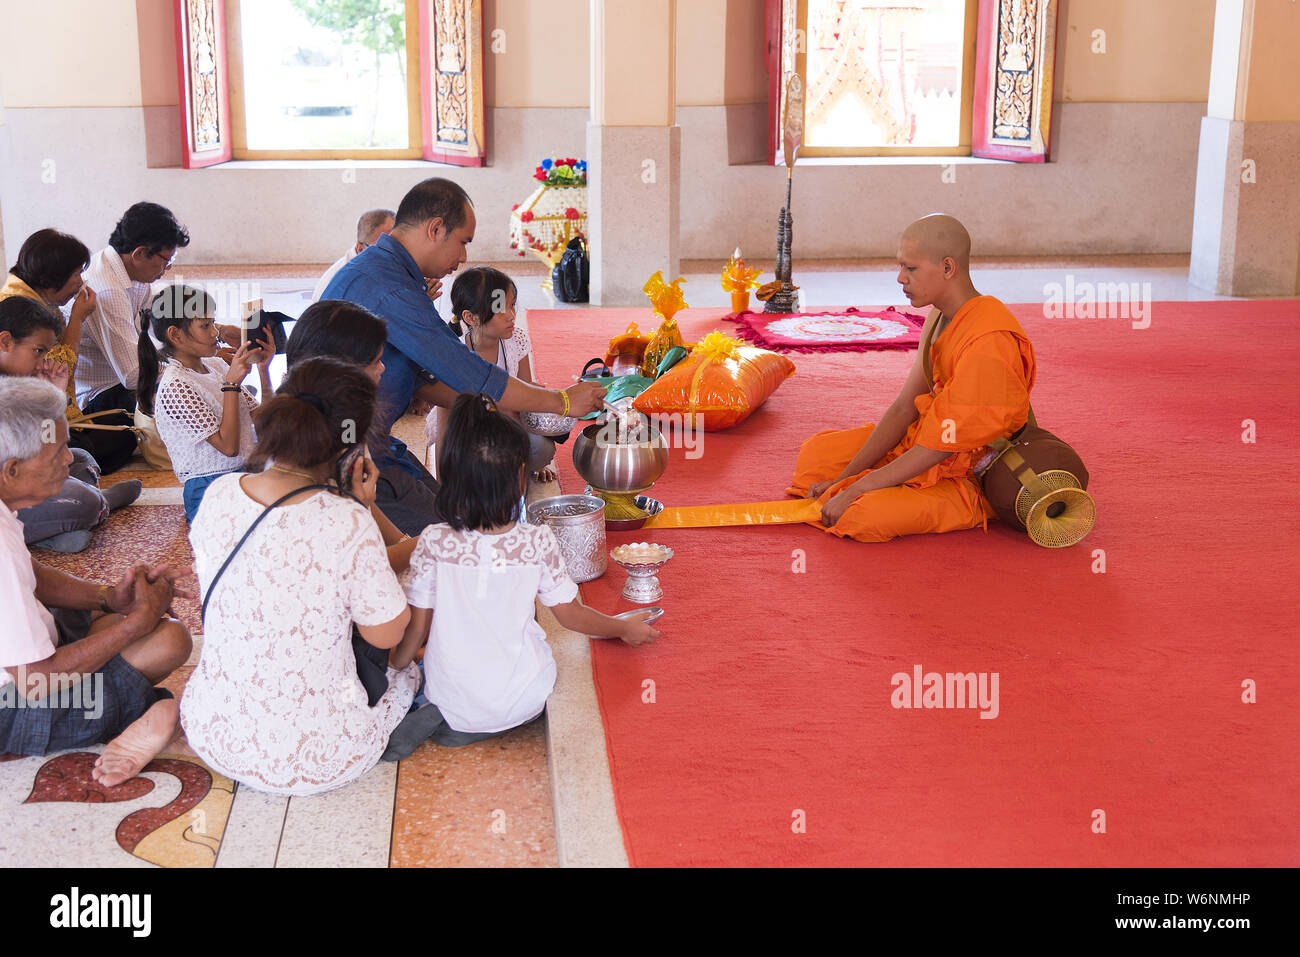 Phuket, Thailand, 04/19/2019 - Single buddhist monk praying with a family  at the Chalong Temple. Stock Photo